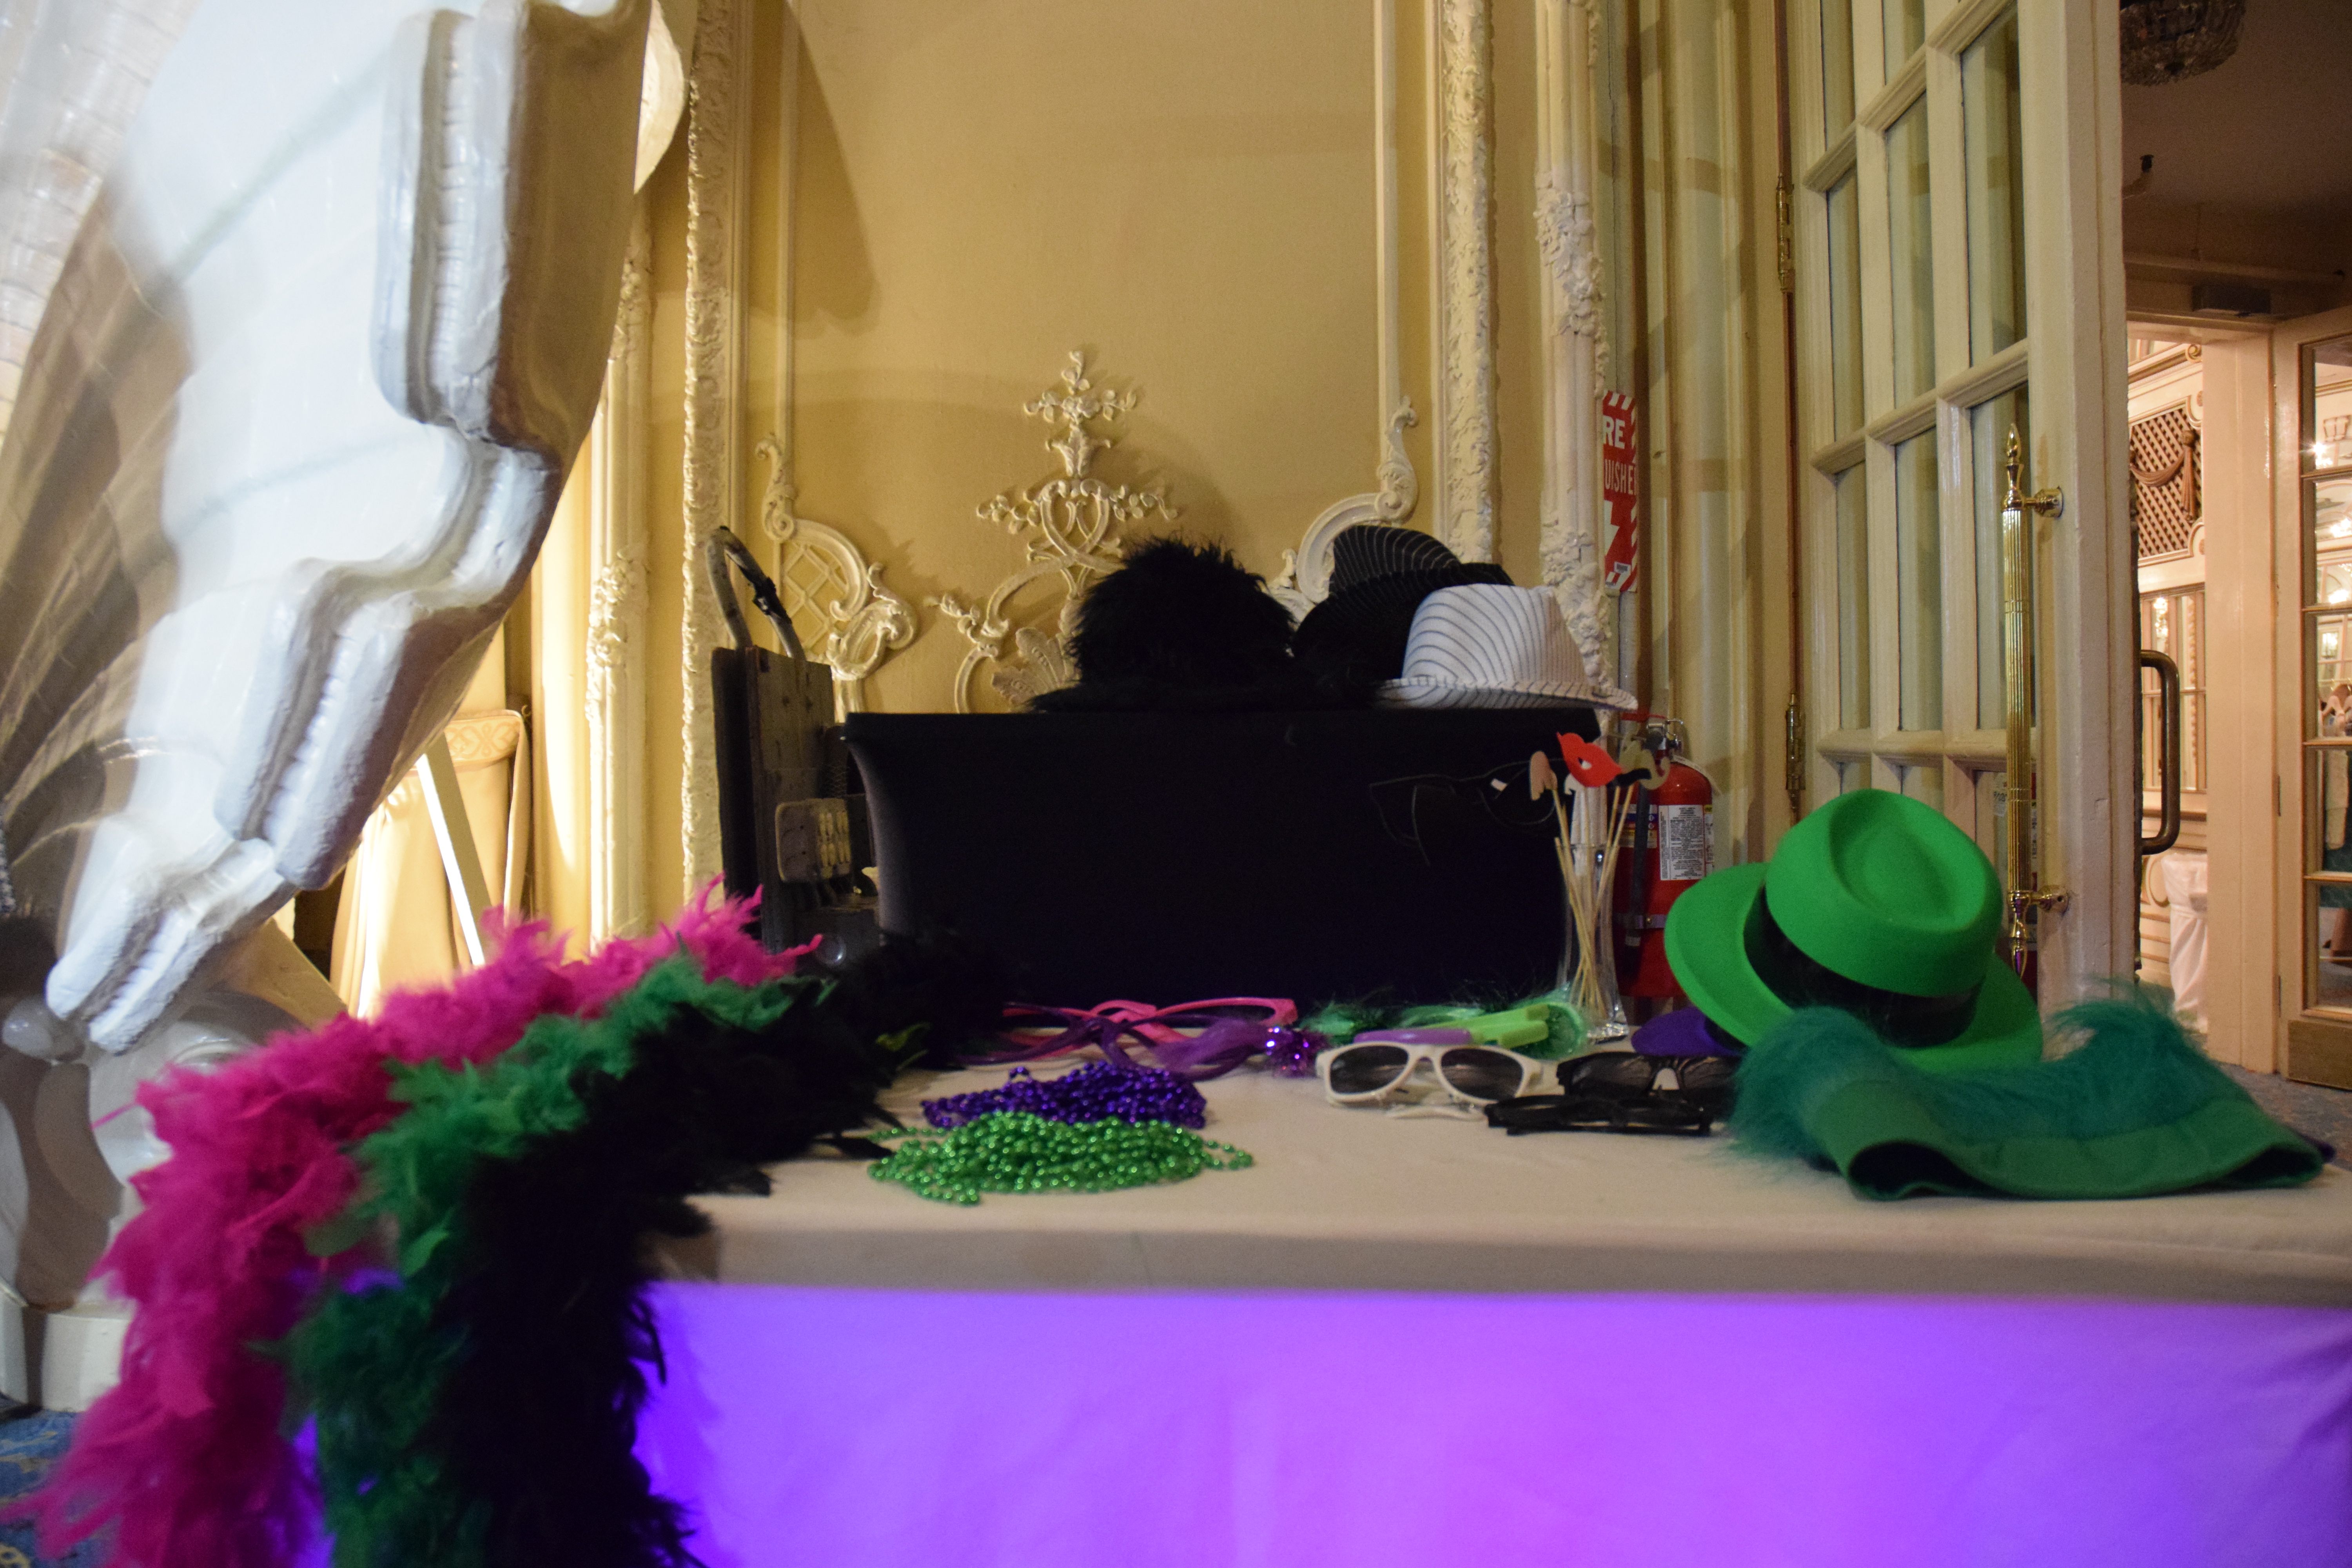 Props and accessories set up for photo booth. Taken by Temi Adeleye.